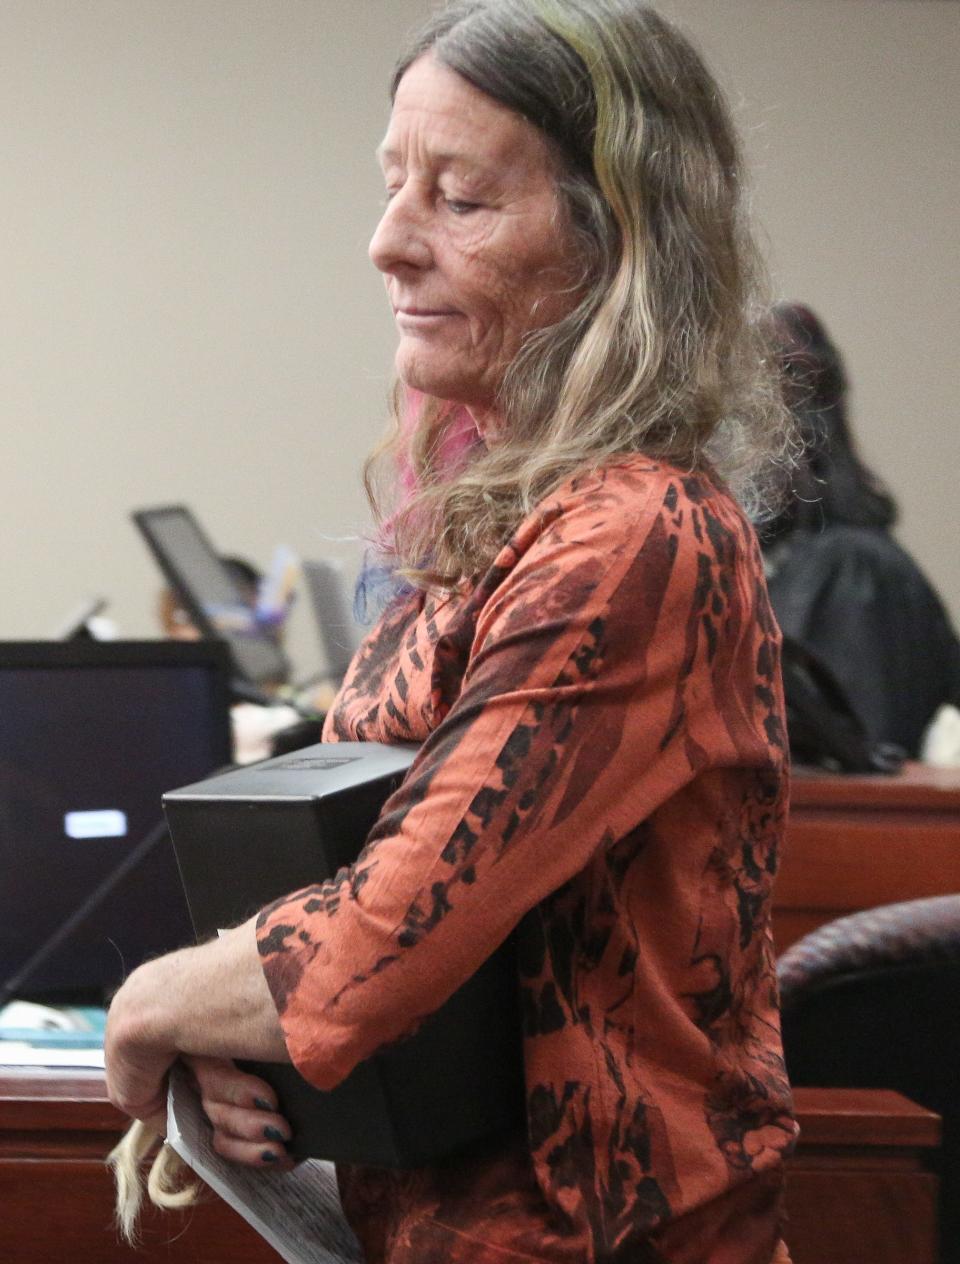 Holding her daughter's ashes and a lock of her hair, Denise Ward leaves the witness stand after giving her victim impact statement during Kiernan Brown's sentencing hearing in Judge Rosemarie Aquilina's courtroom, Wednesday, Nov. 2, 2022, for the brutal murders of two Lansing-area women in 2019, including her daughter Julie Mooney, 32, of Williamston, and Kaylee Brock, 26, of Holt.  "We will never forget what you did - how can we? You murdered our daughters around Mother's Day," she said. "May you smell death, but only from yourself. May you feel the pain of what you have done and will be done to you."